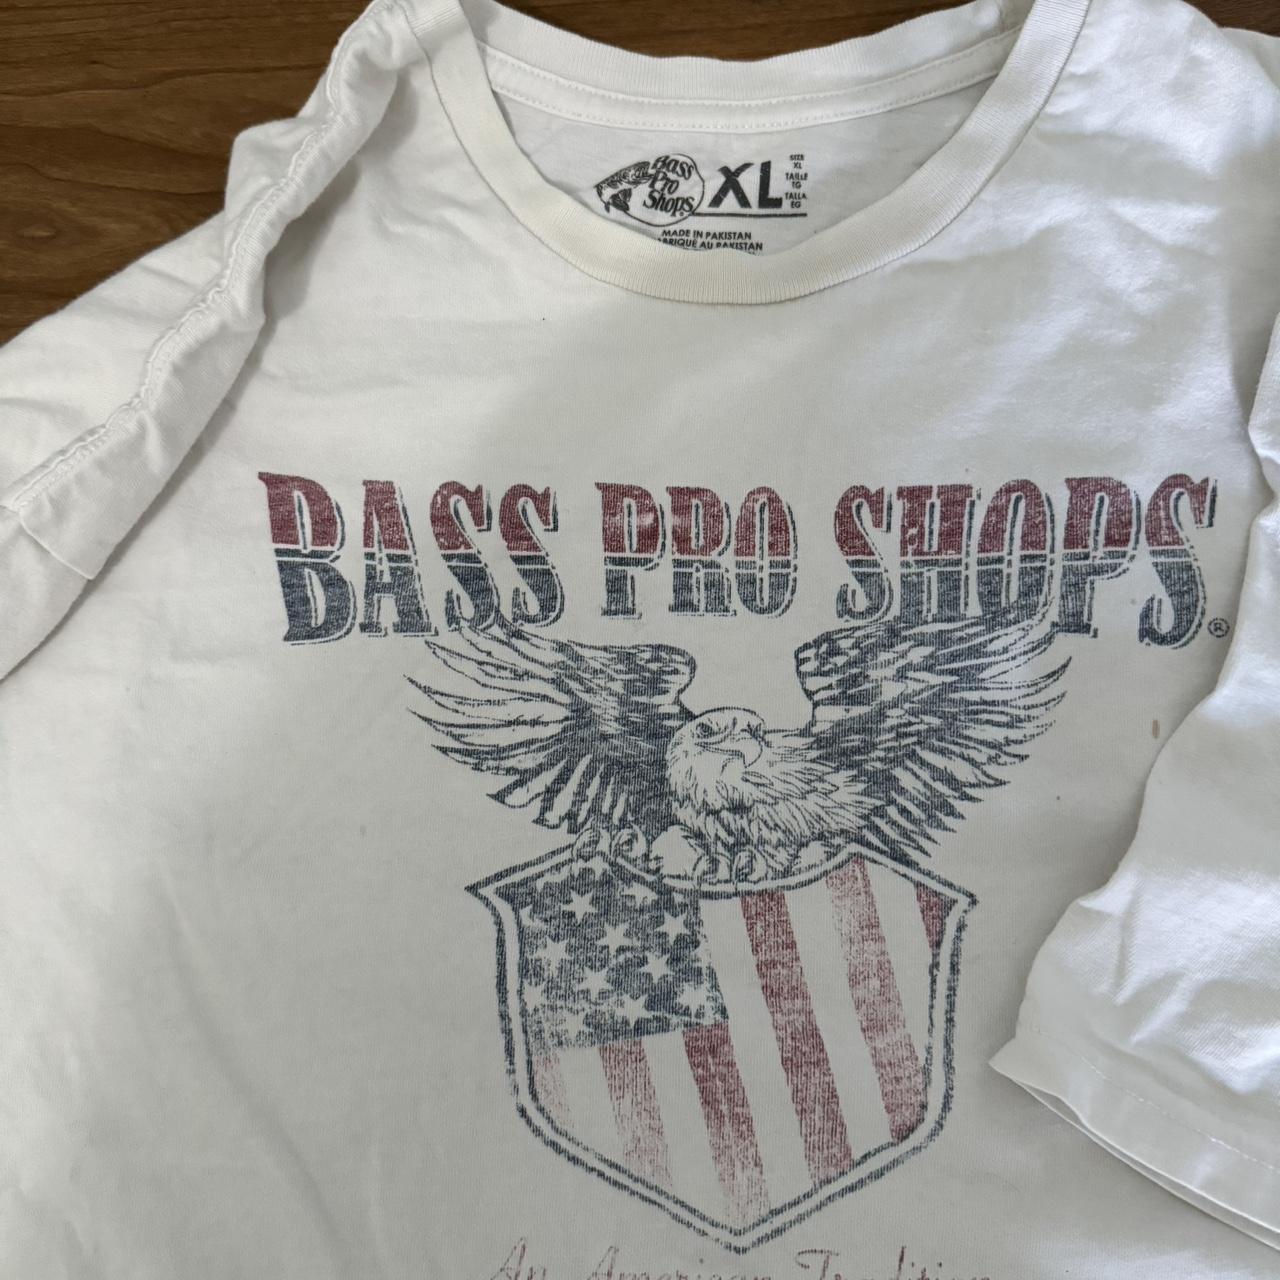 Bass Pro Shops, New & Secondhand Fashion